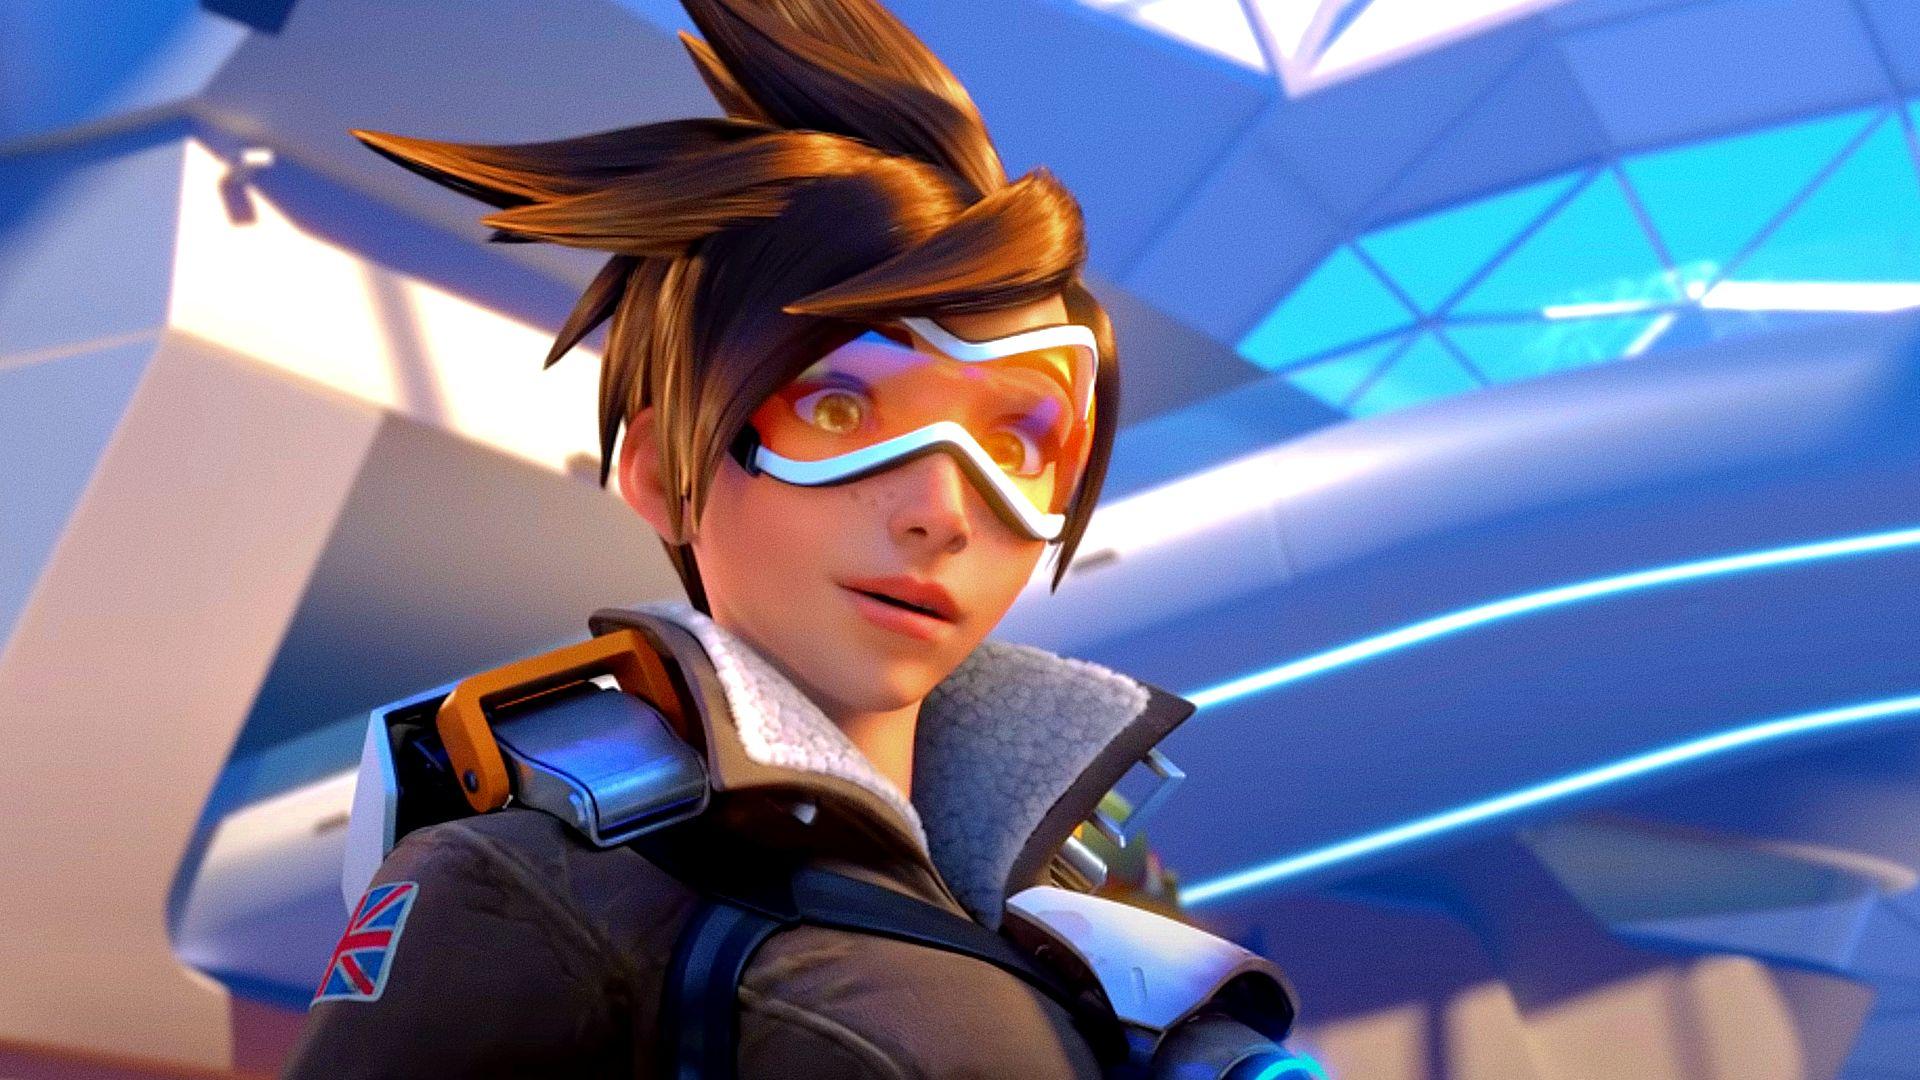 Overwatch 2 launch time looms as internet says goodbye first game | The Loadout